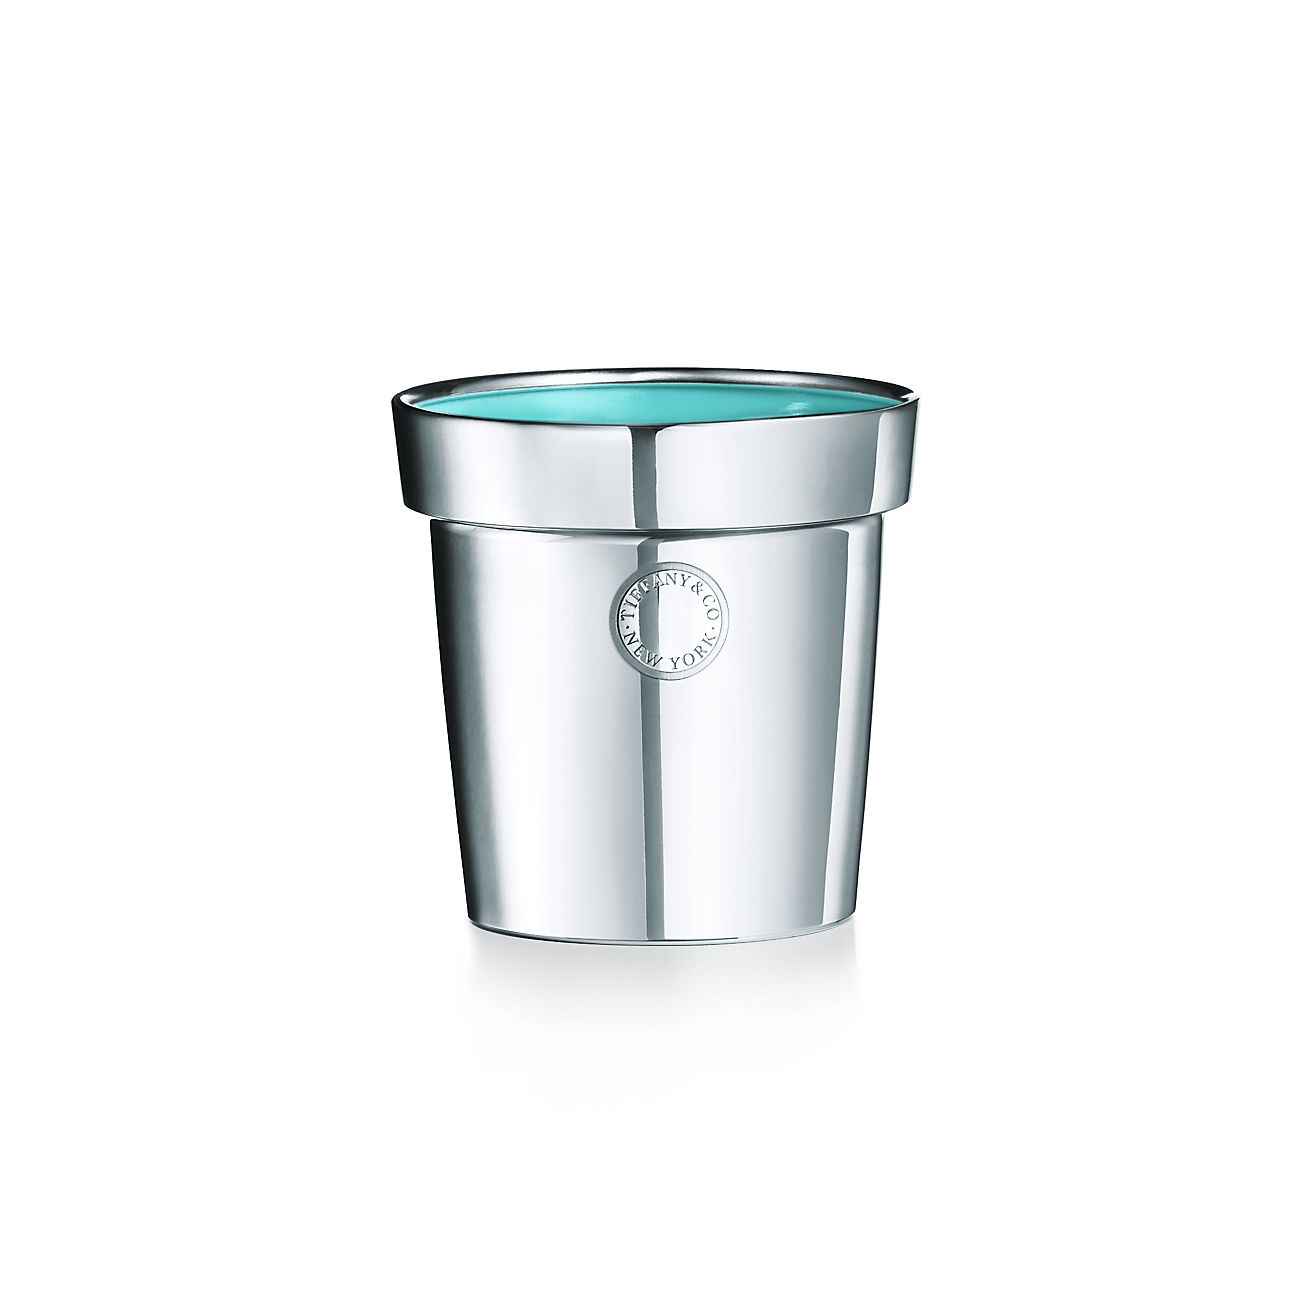 tiffany and co everyday objects